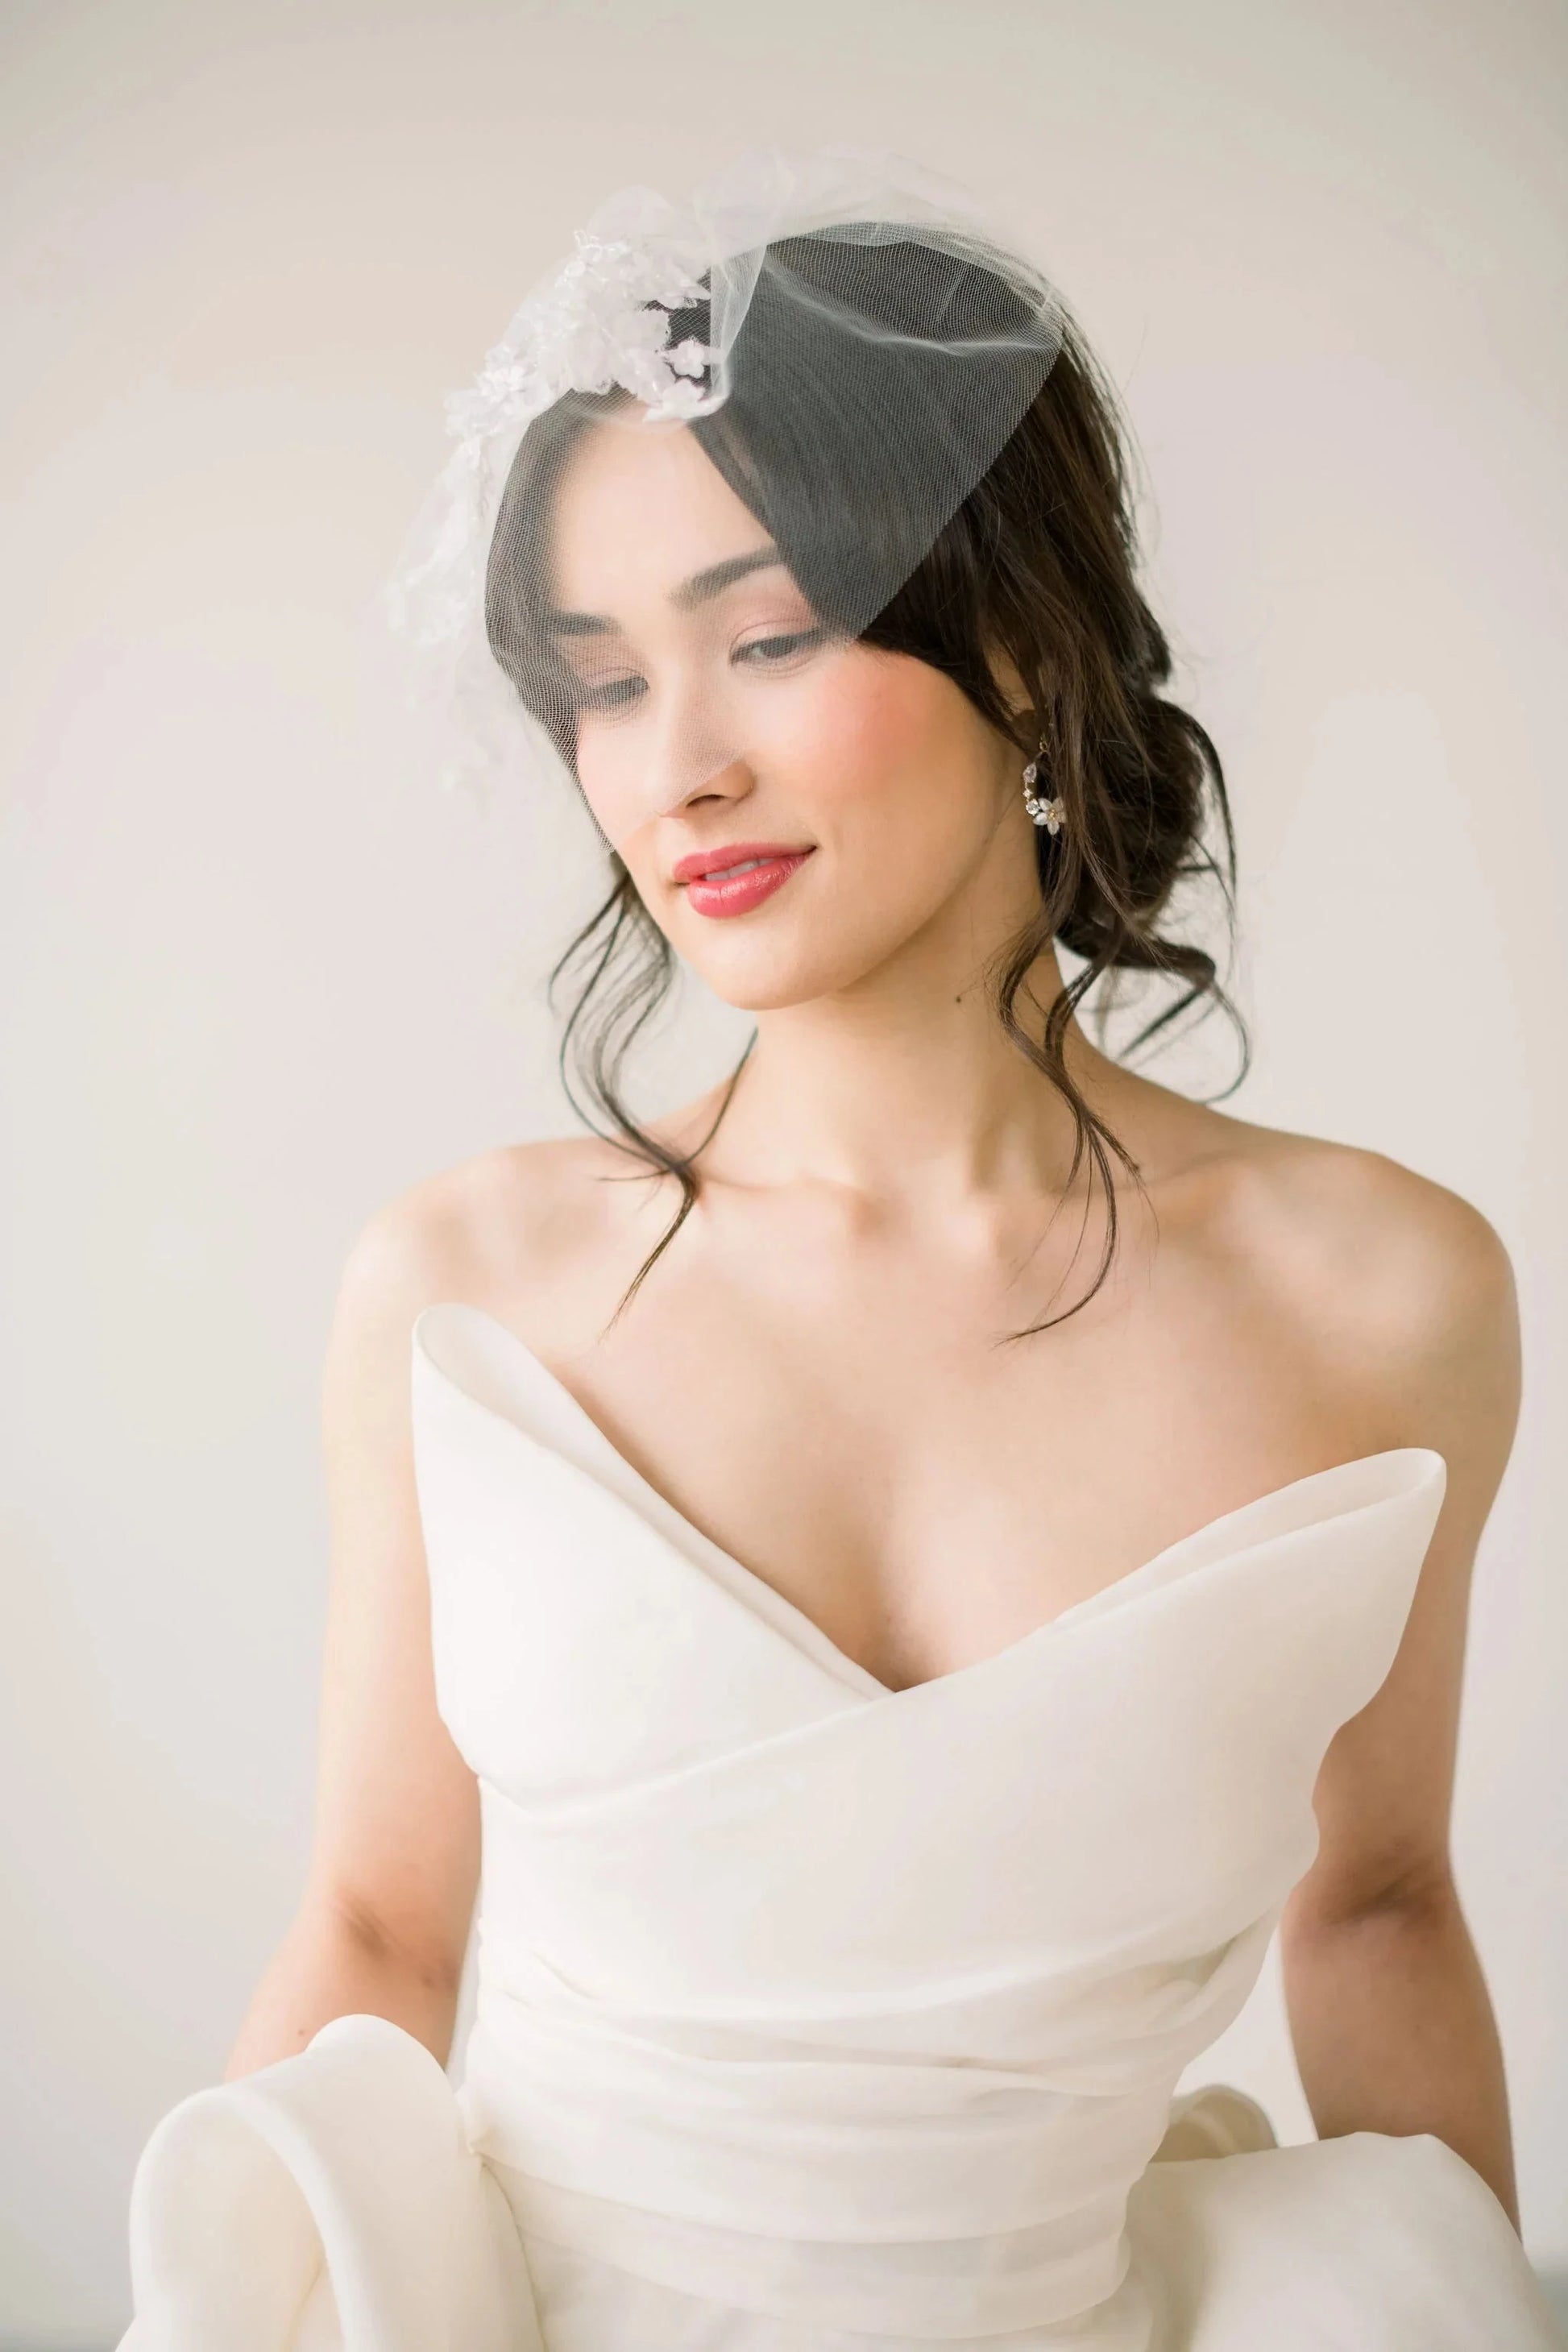 Tulle birdcage veil with lace accents Tessa Kim